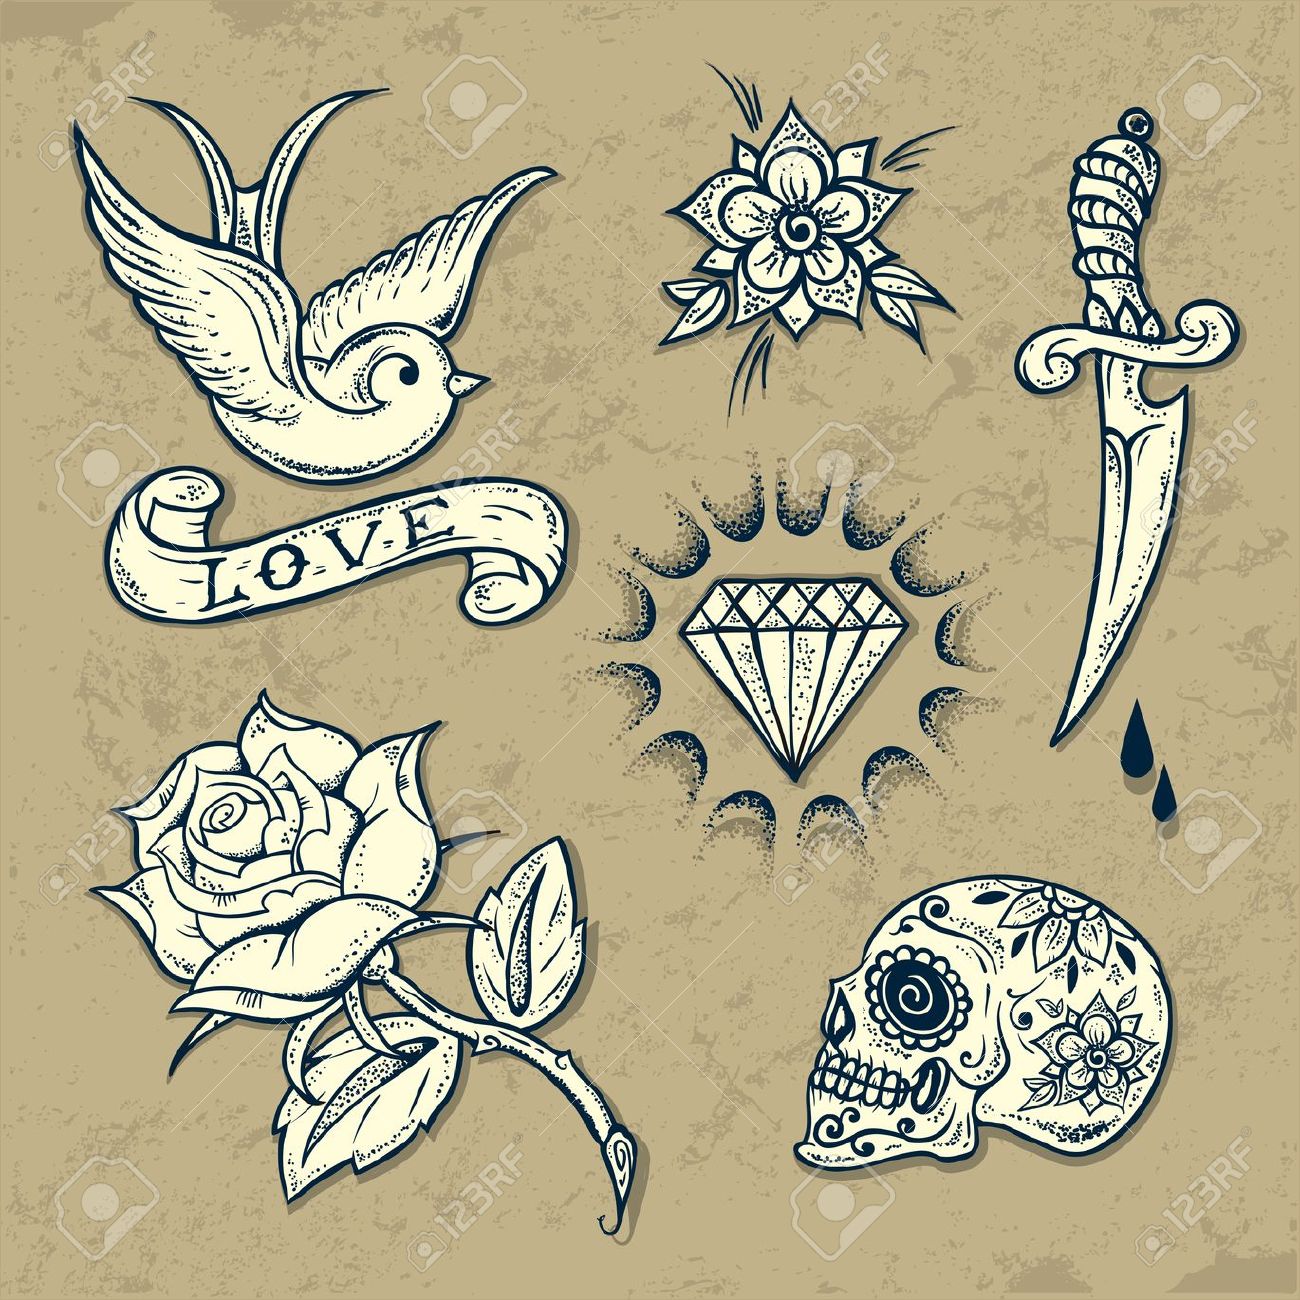 21355461-Set-of-Old-School-Tattoo-Elements-with-roses-and-diamonds-Stock-Vector